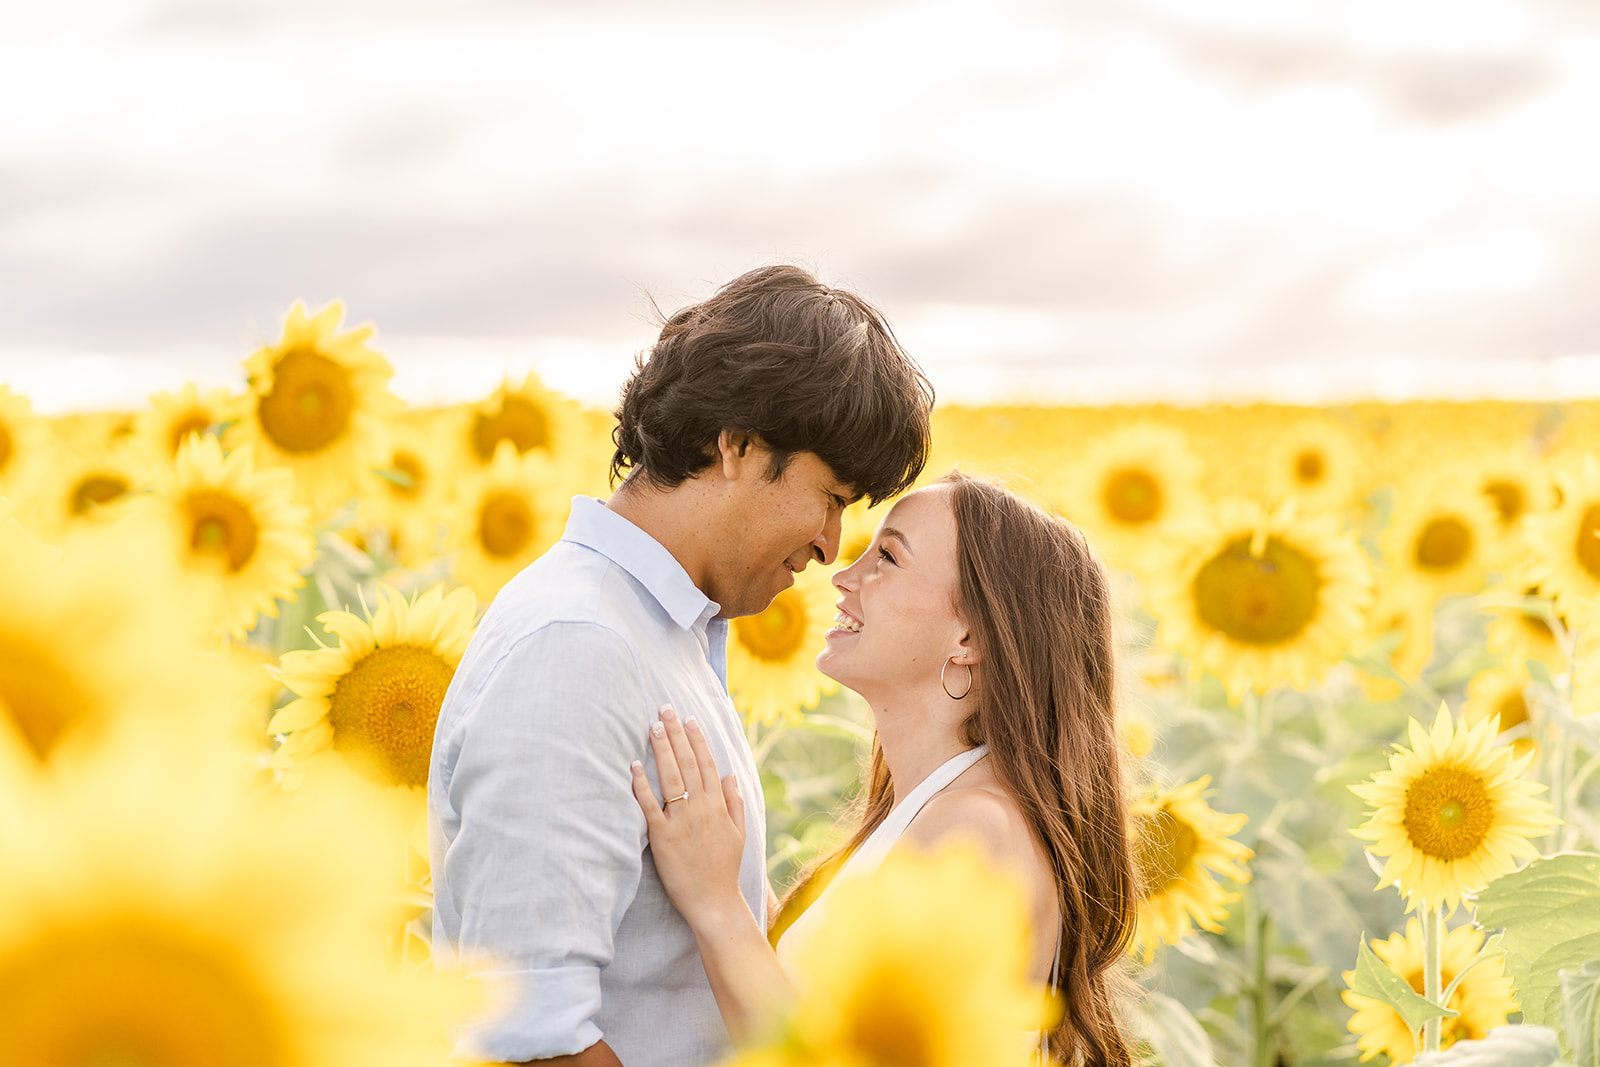 Dreamy Sunflower Engagement in Australian country